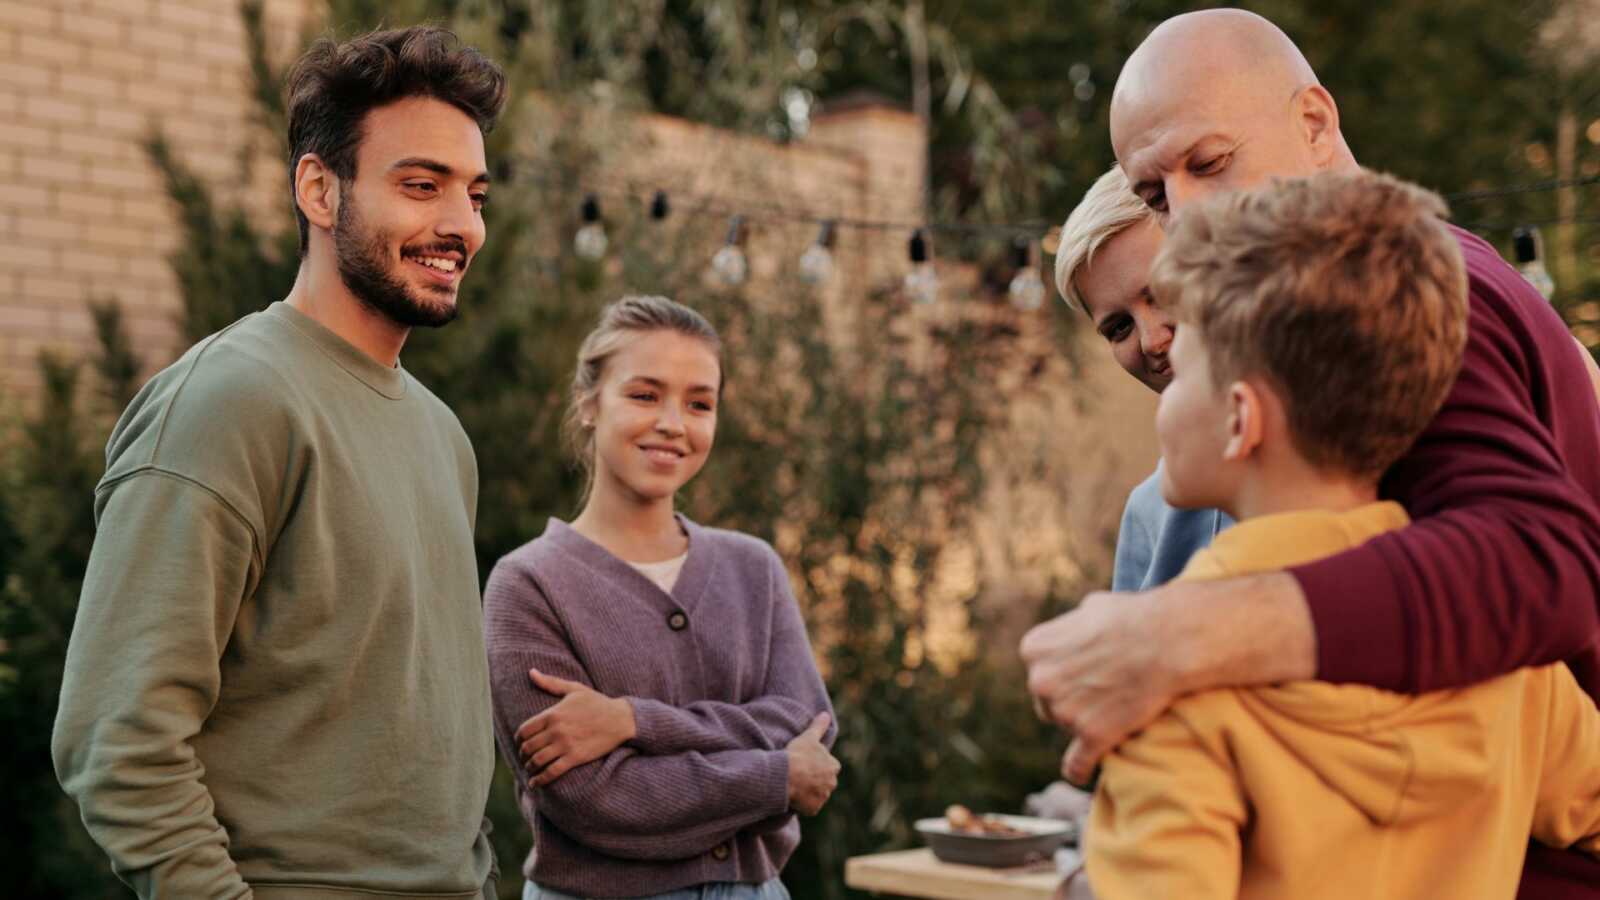 Two people meet a young boy with his parents